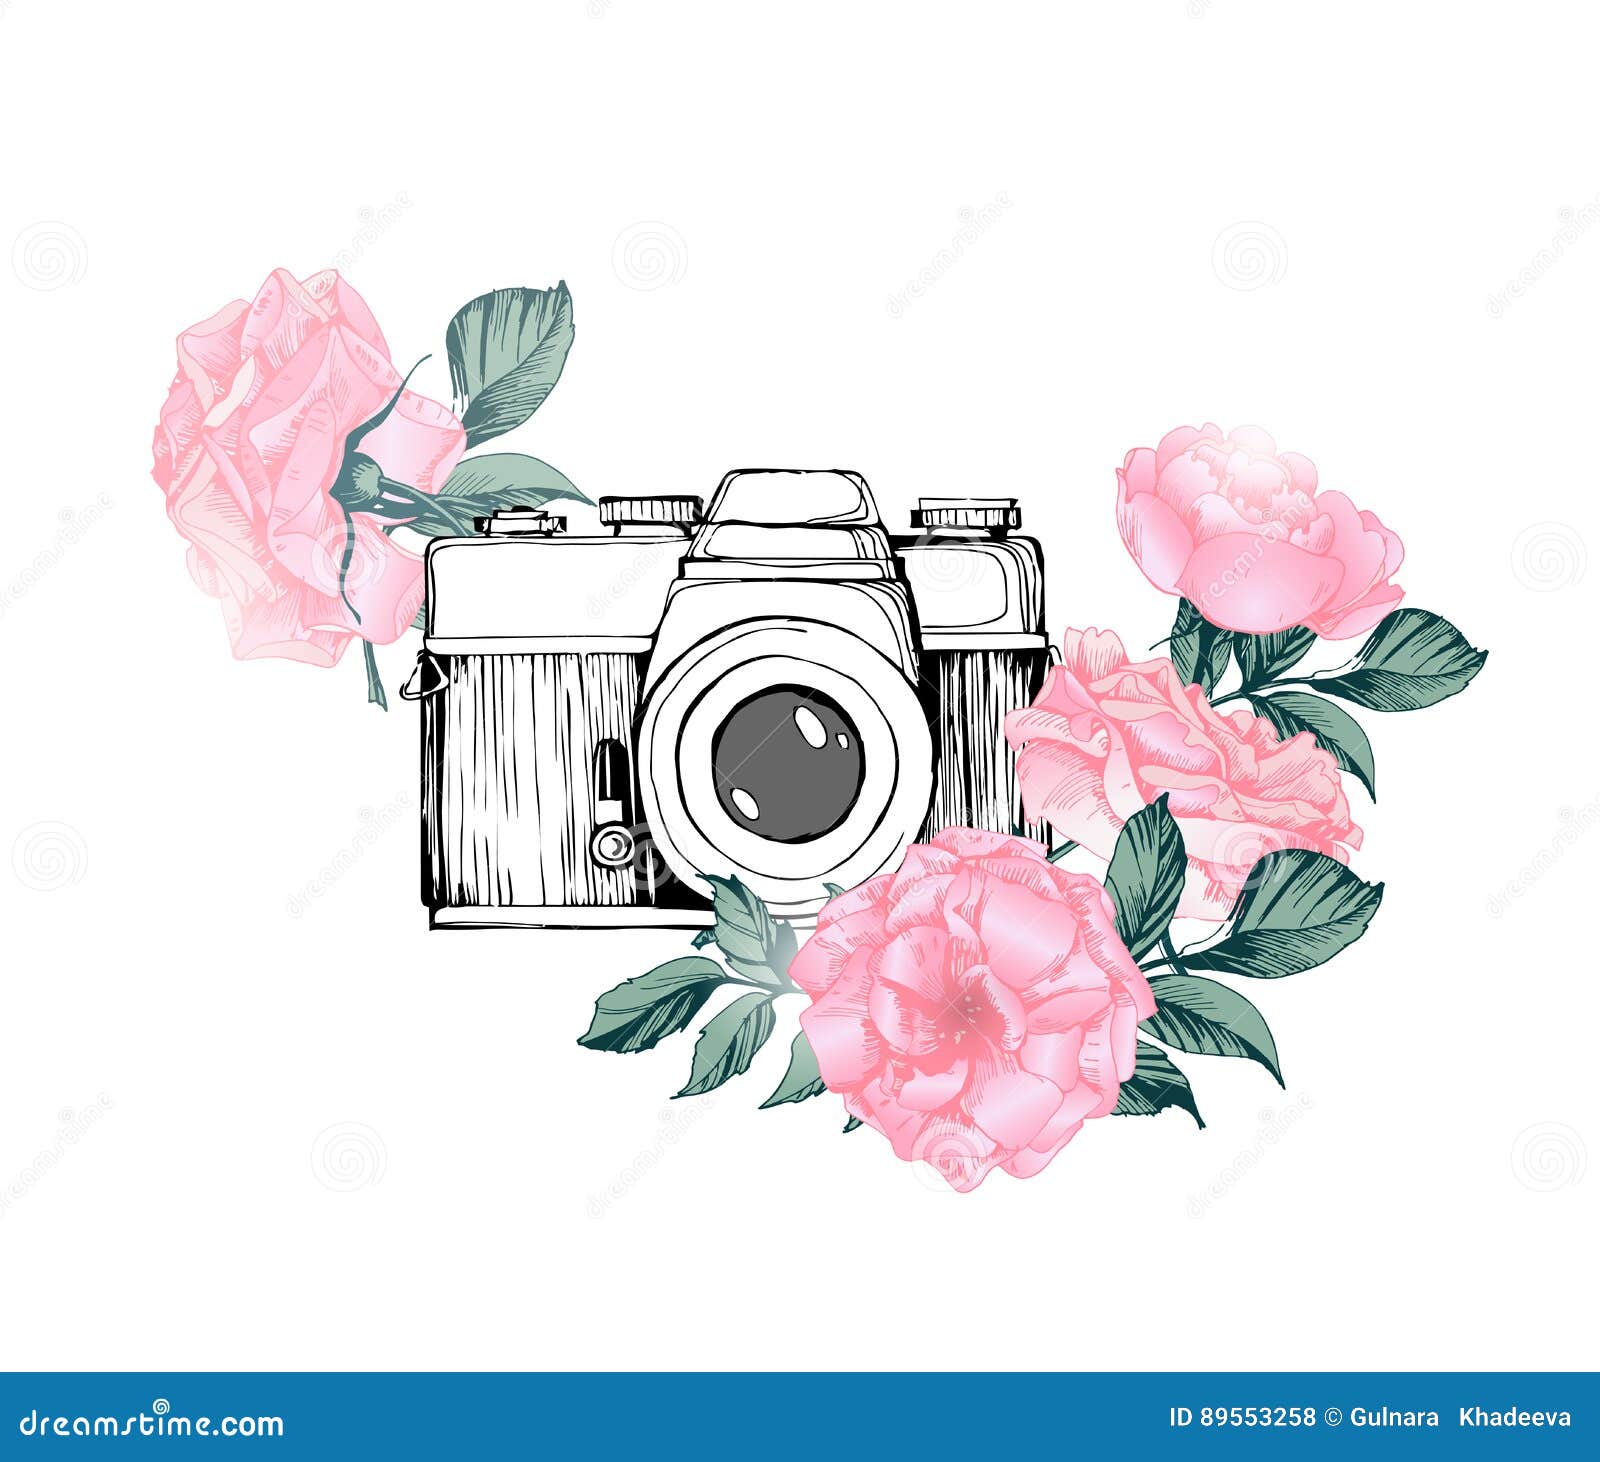 Download Vintage Retro Photo Camera In Flowers, Leaves, Branches On White Background. Hand Drawn Vector ...